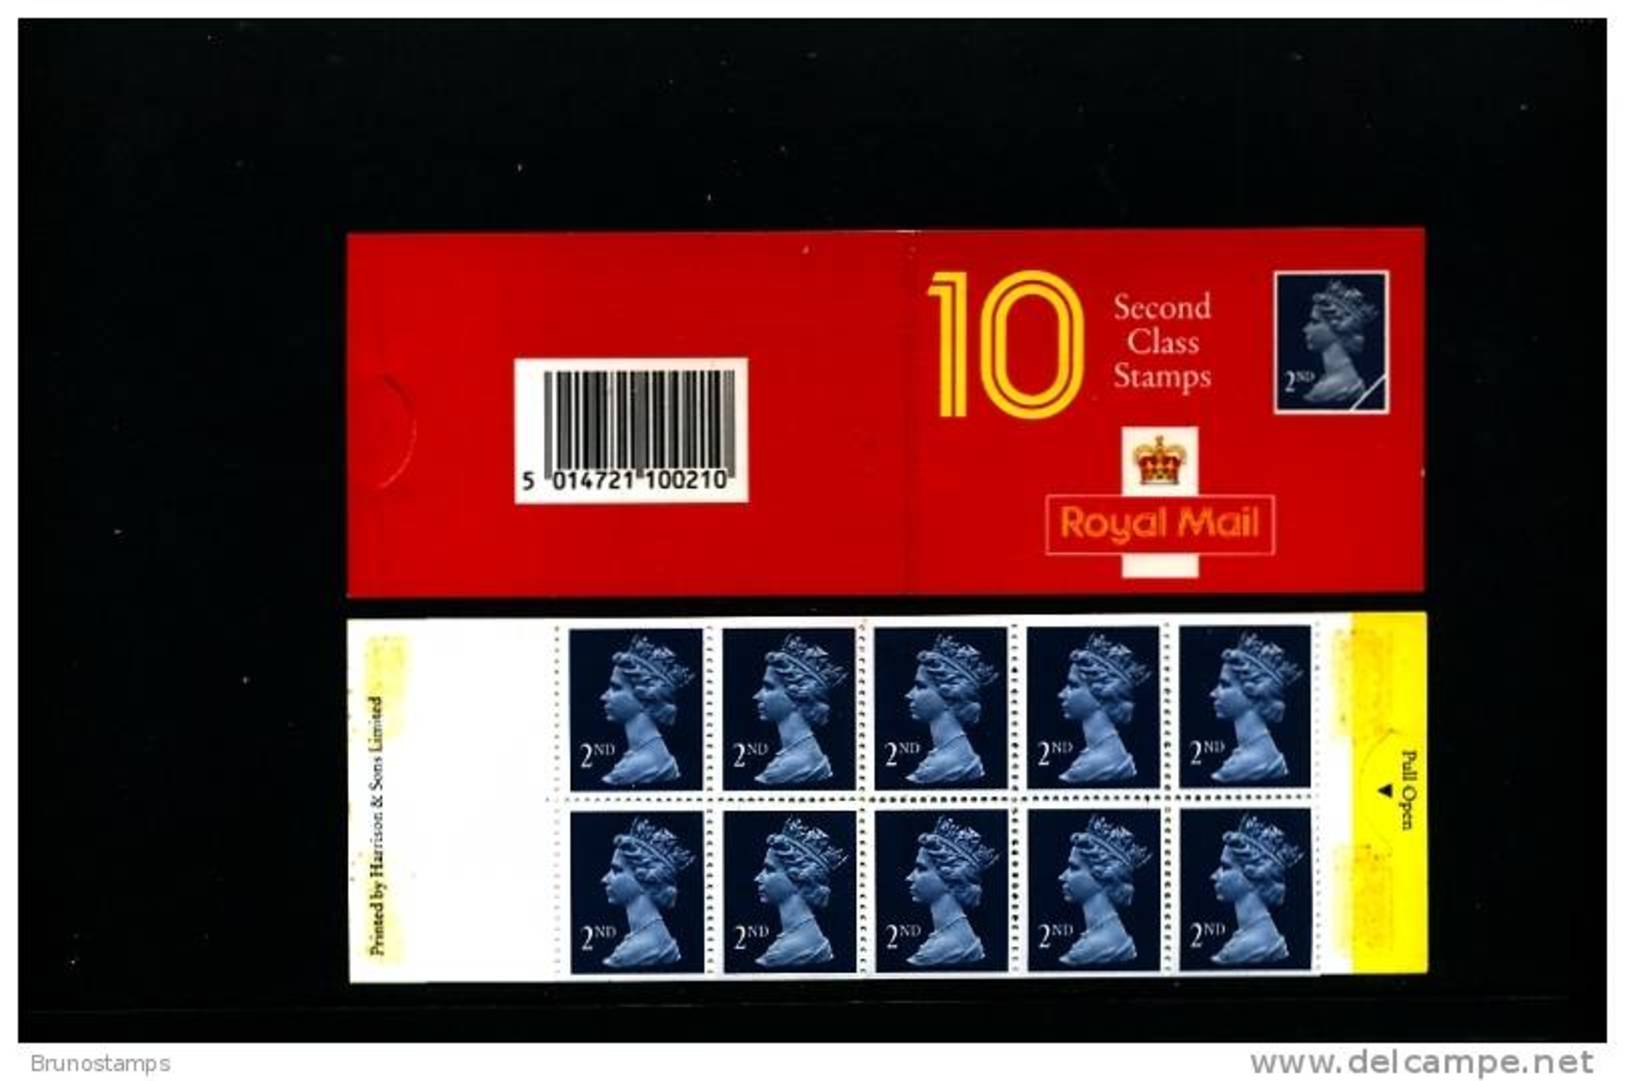 GREAT BRITAIN - 10 X 2nd Class (Harrison)  DARK  BOOKLET MINT NH  HC 3 - Booklets